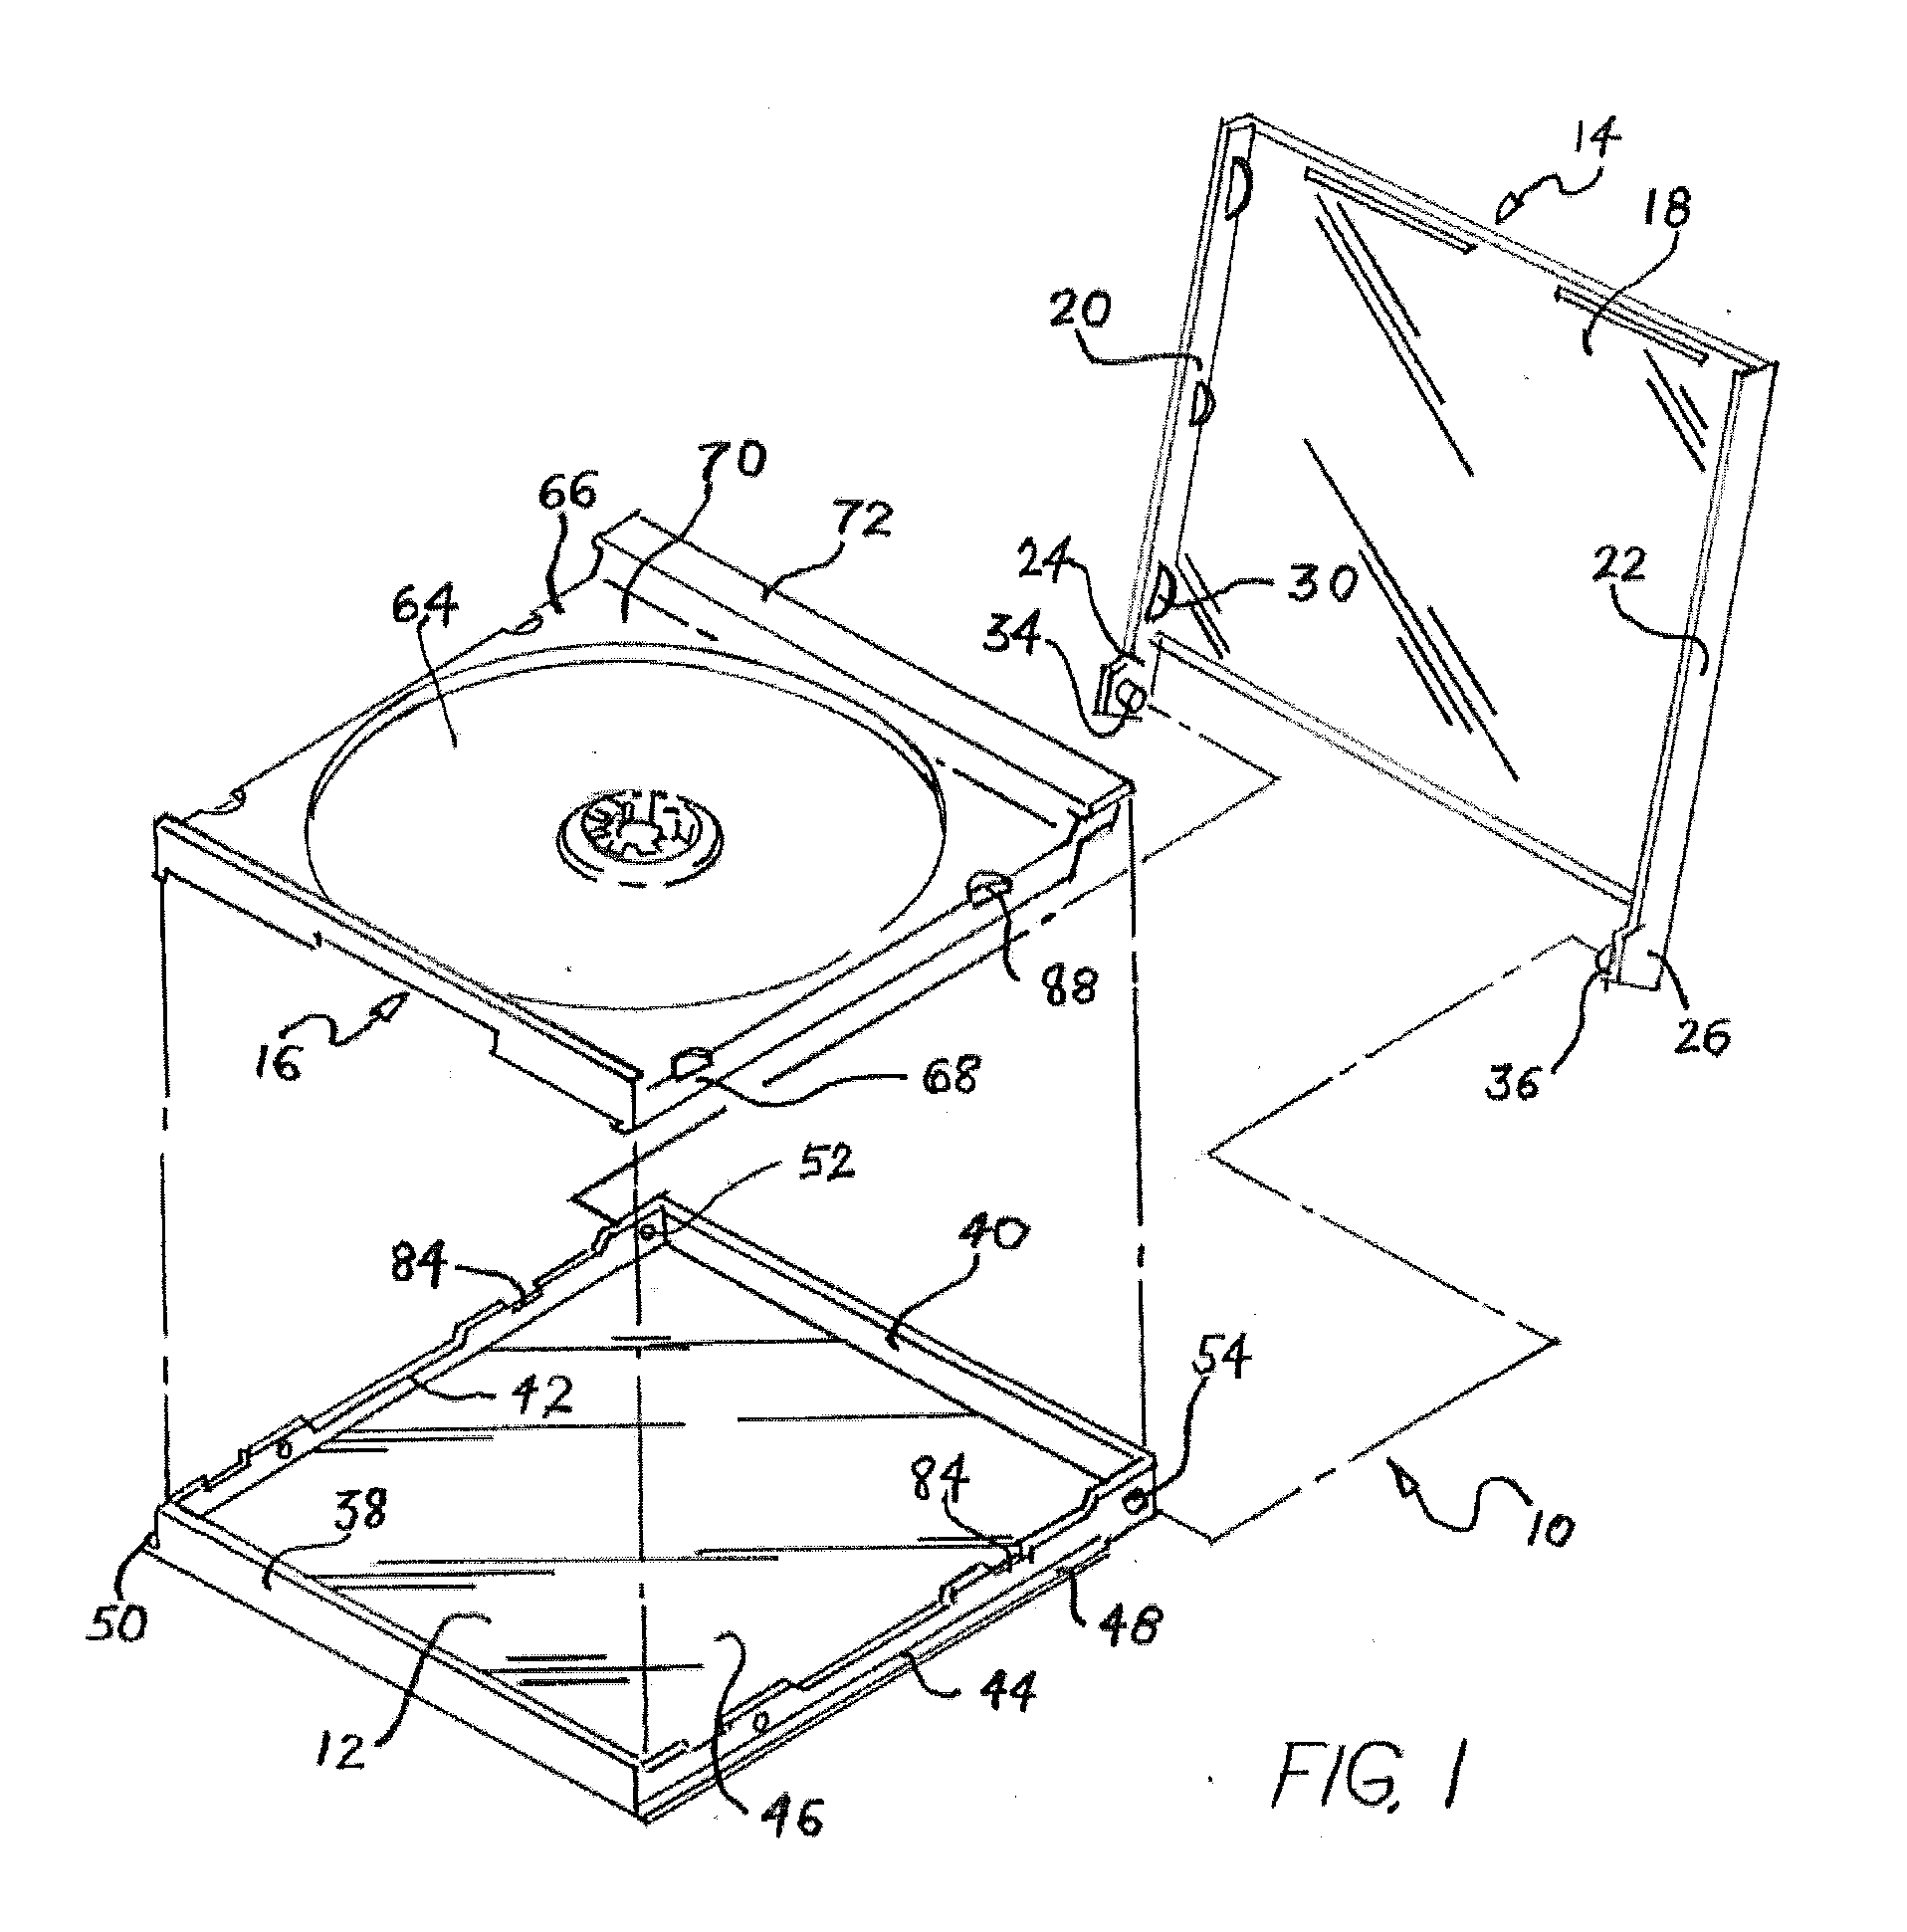 Magnetic composite materials and articles containing such